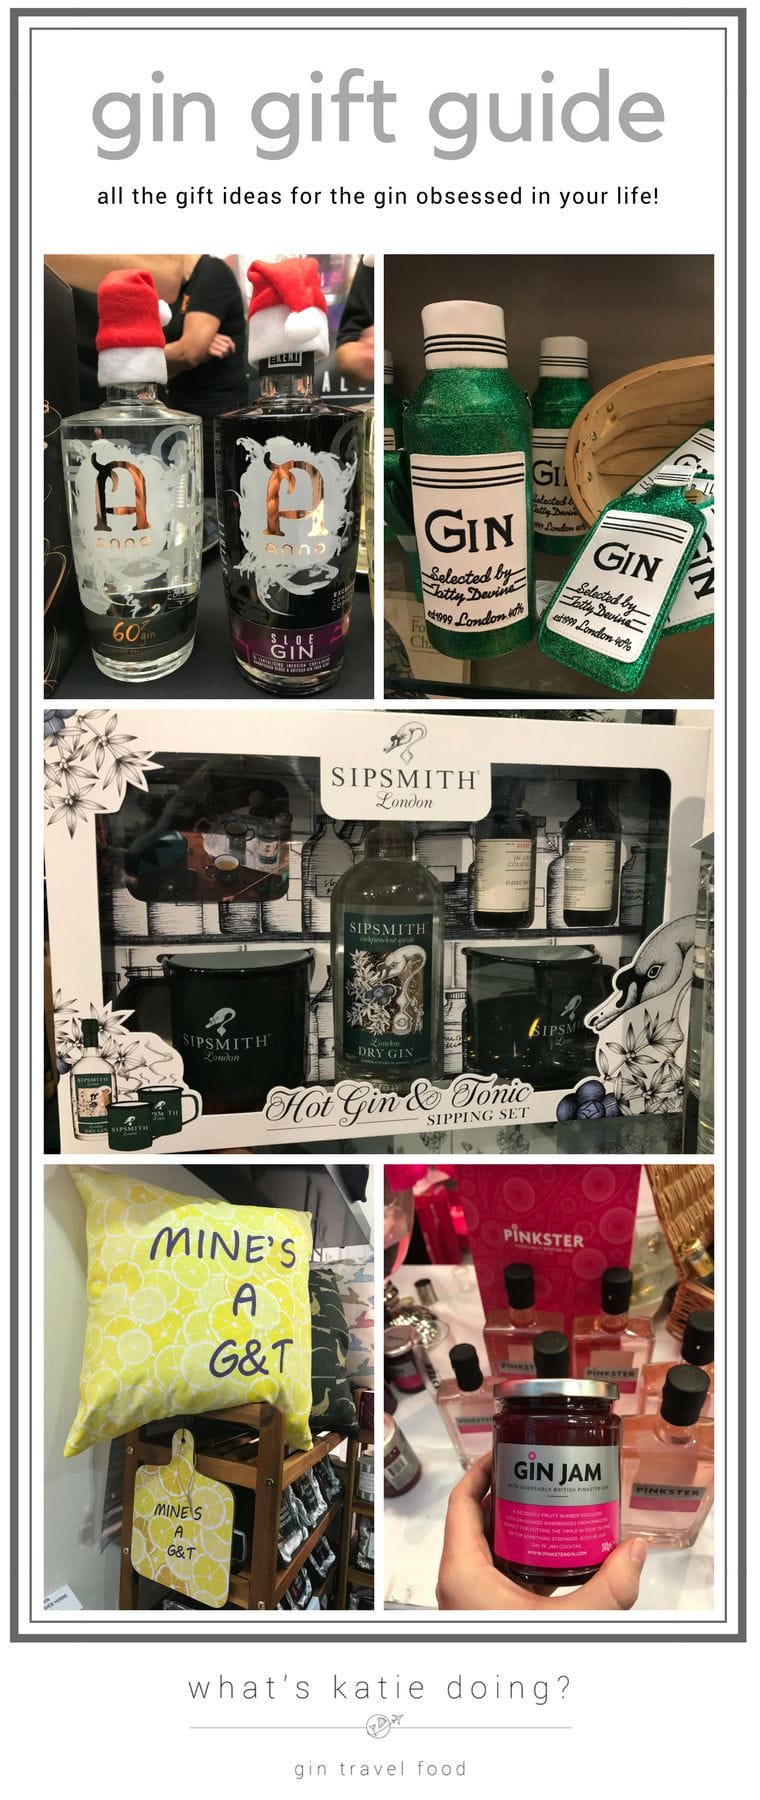 gin gift guide on What's Katie Doing? blog - everything you need for the gin obsessed in your life!